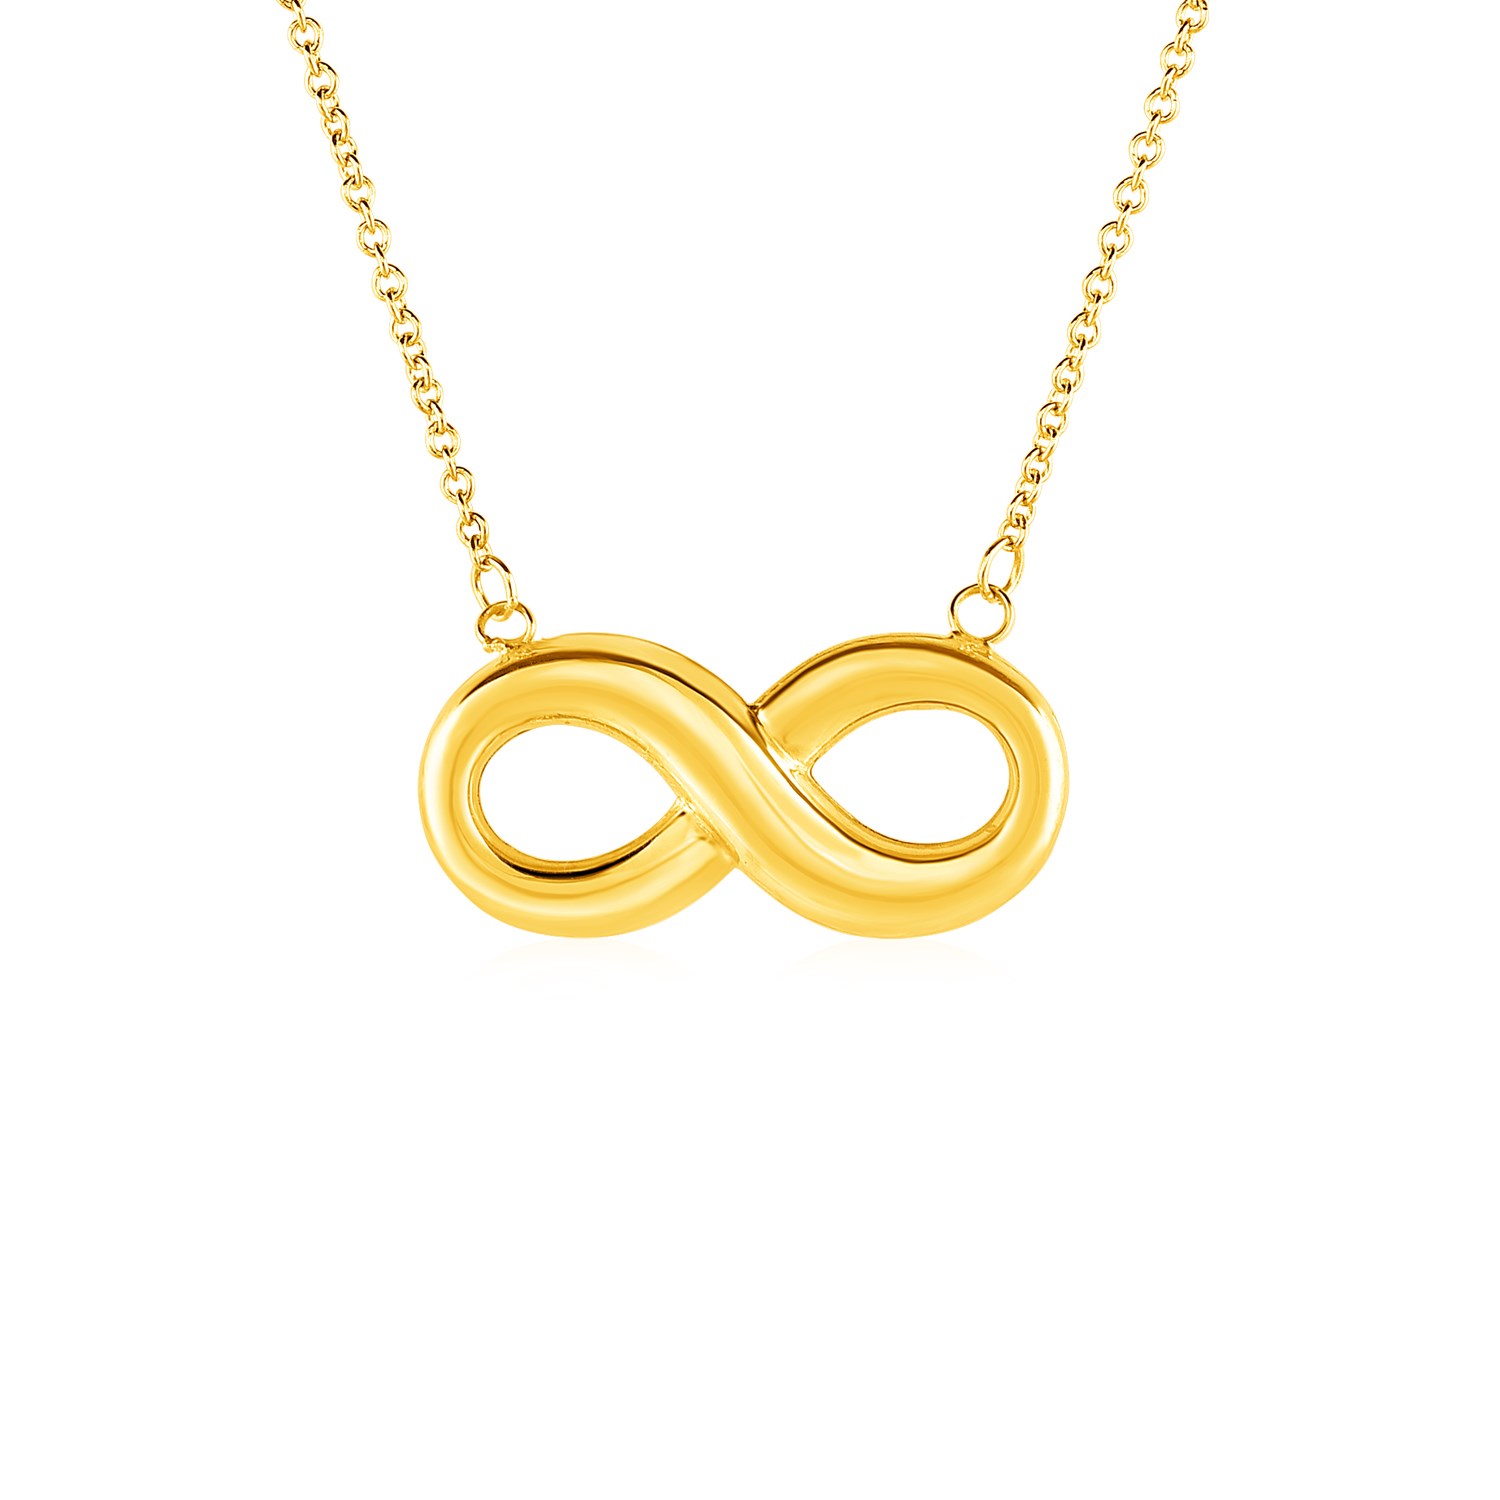 Necklace with Infinity Symbol in 10k Yellow Gold - Richard Cannon Jewelry